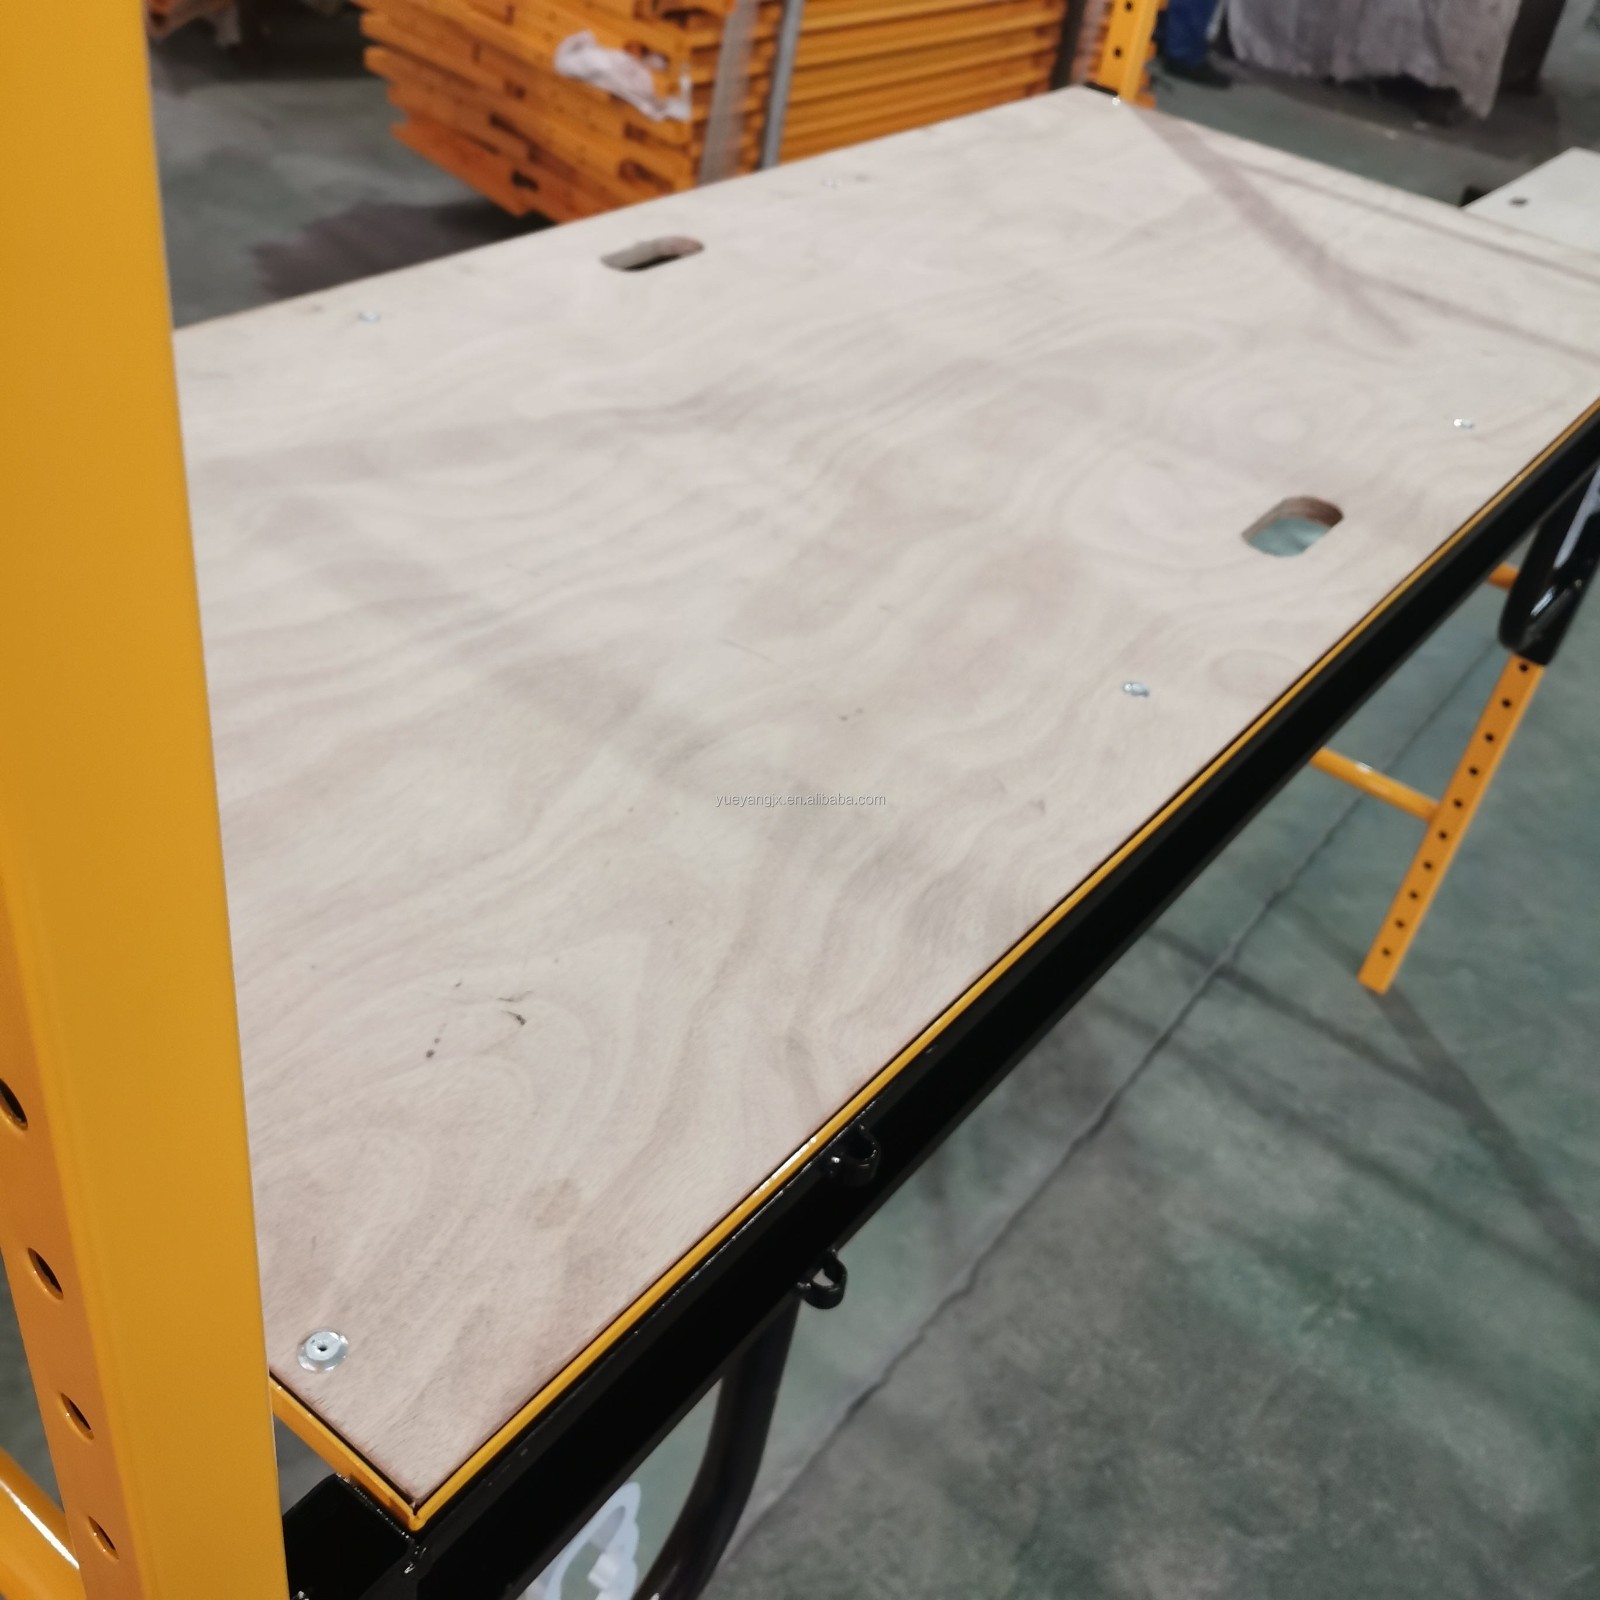 12mm thickness plywood platform with hand holes for easy hold.